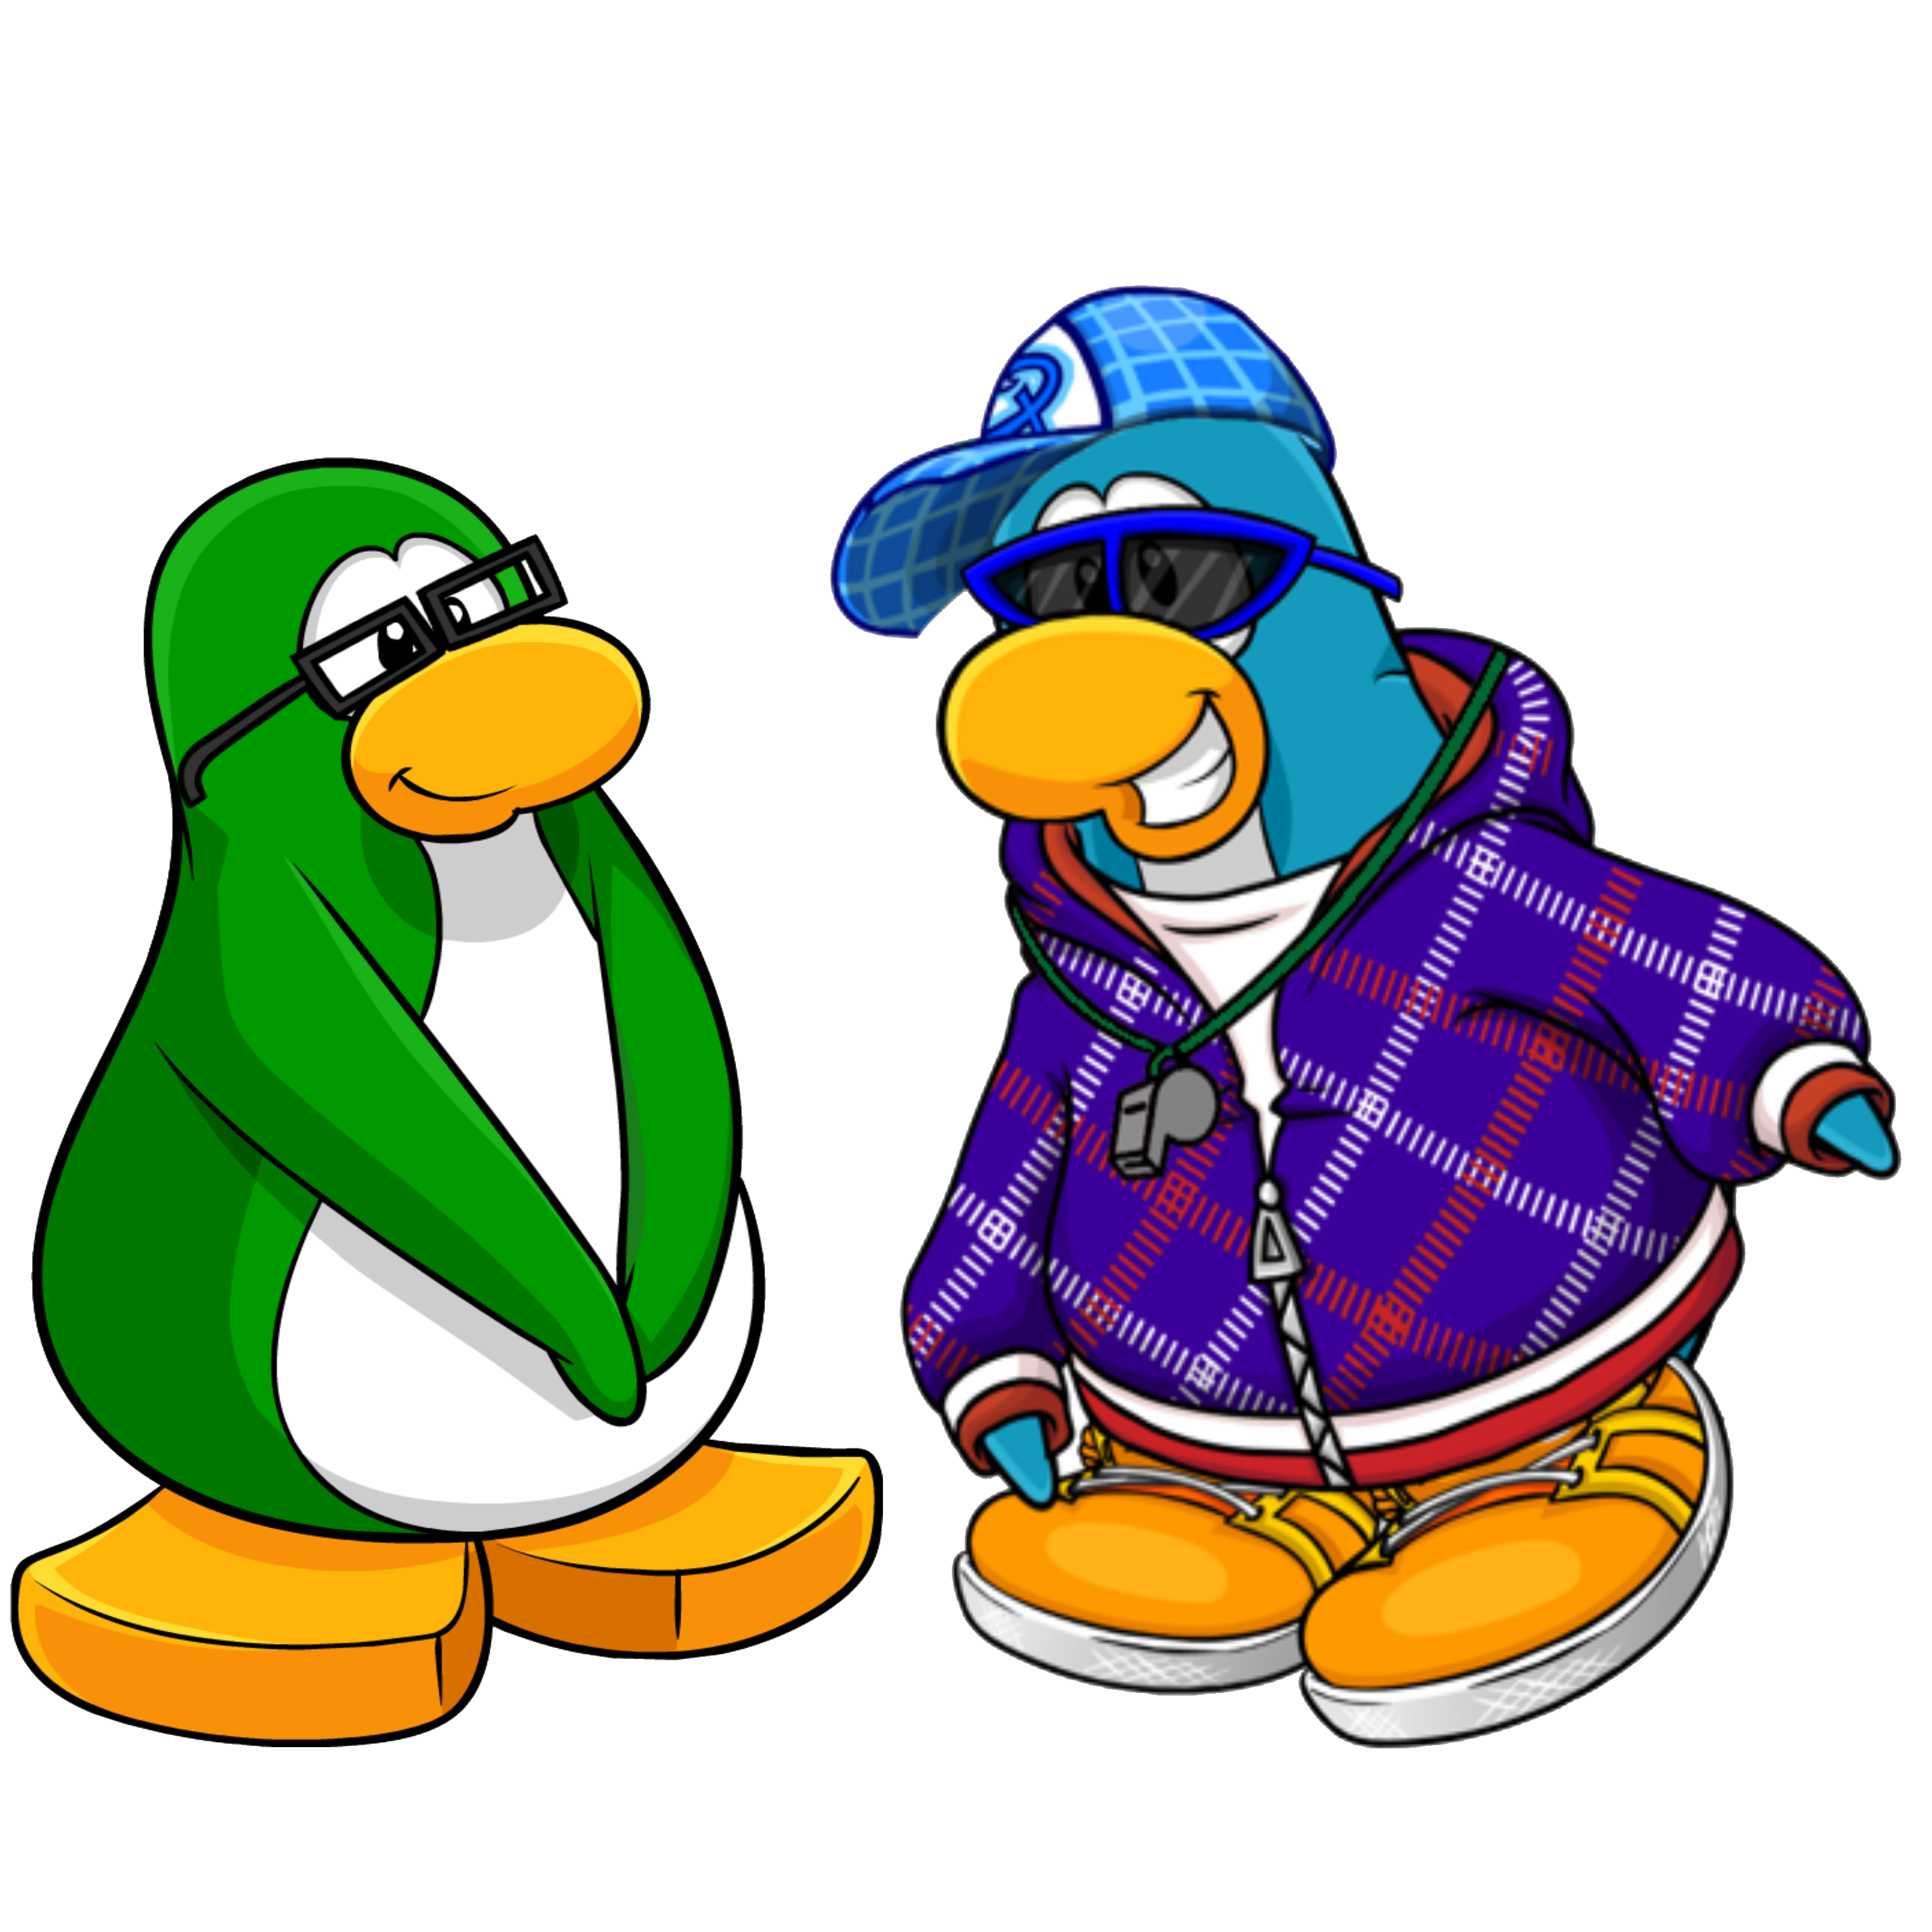 Image Penguins Together Png Club Penguin Wiki The Free Editable Encyclopedia About Club